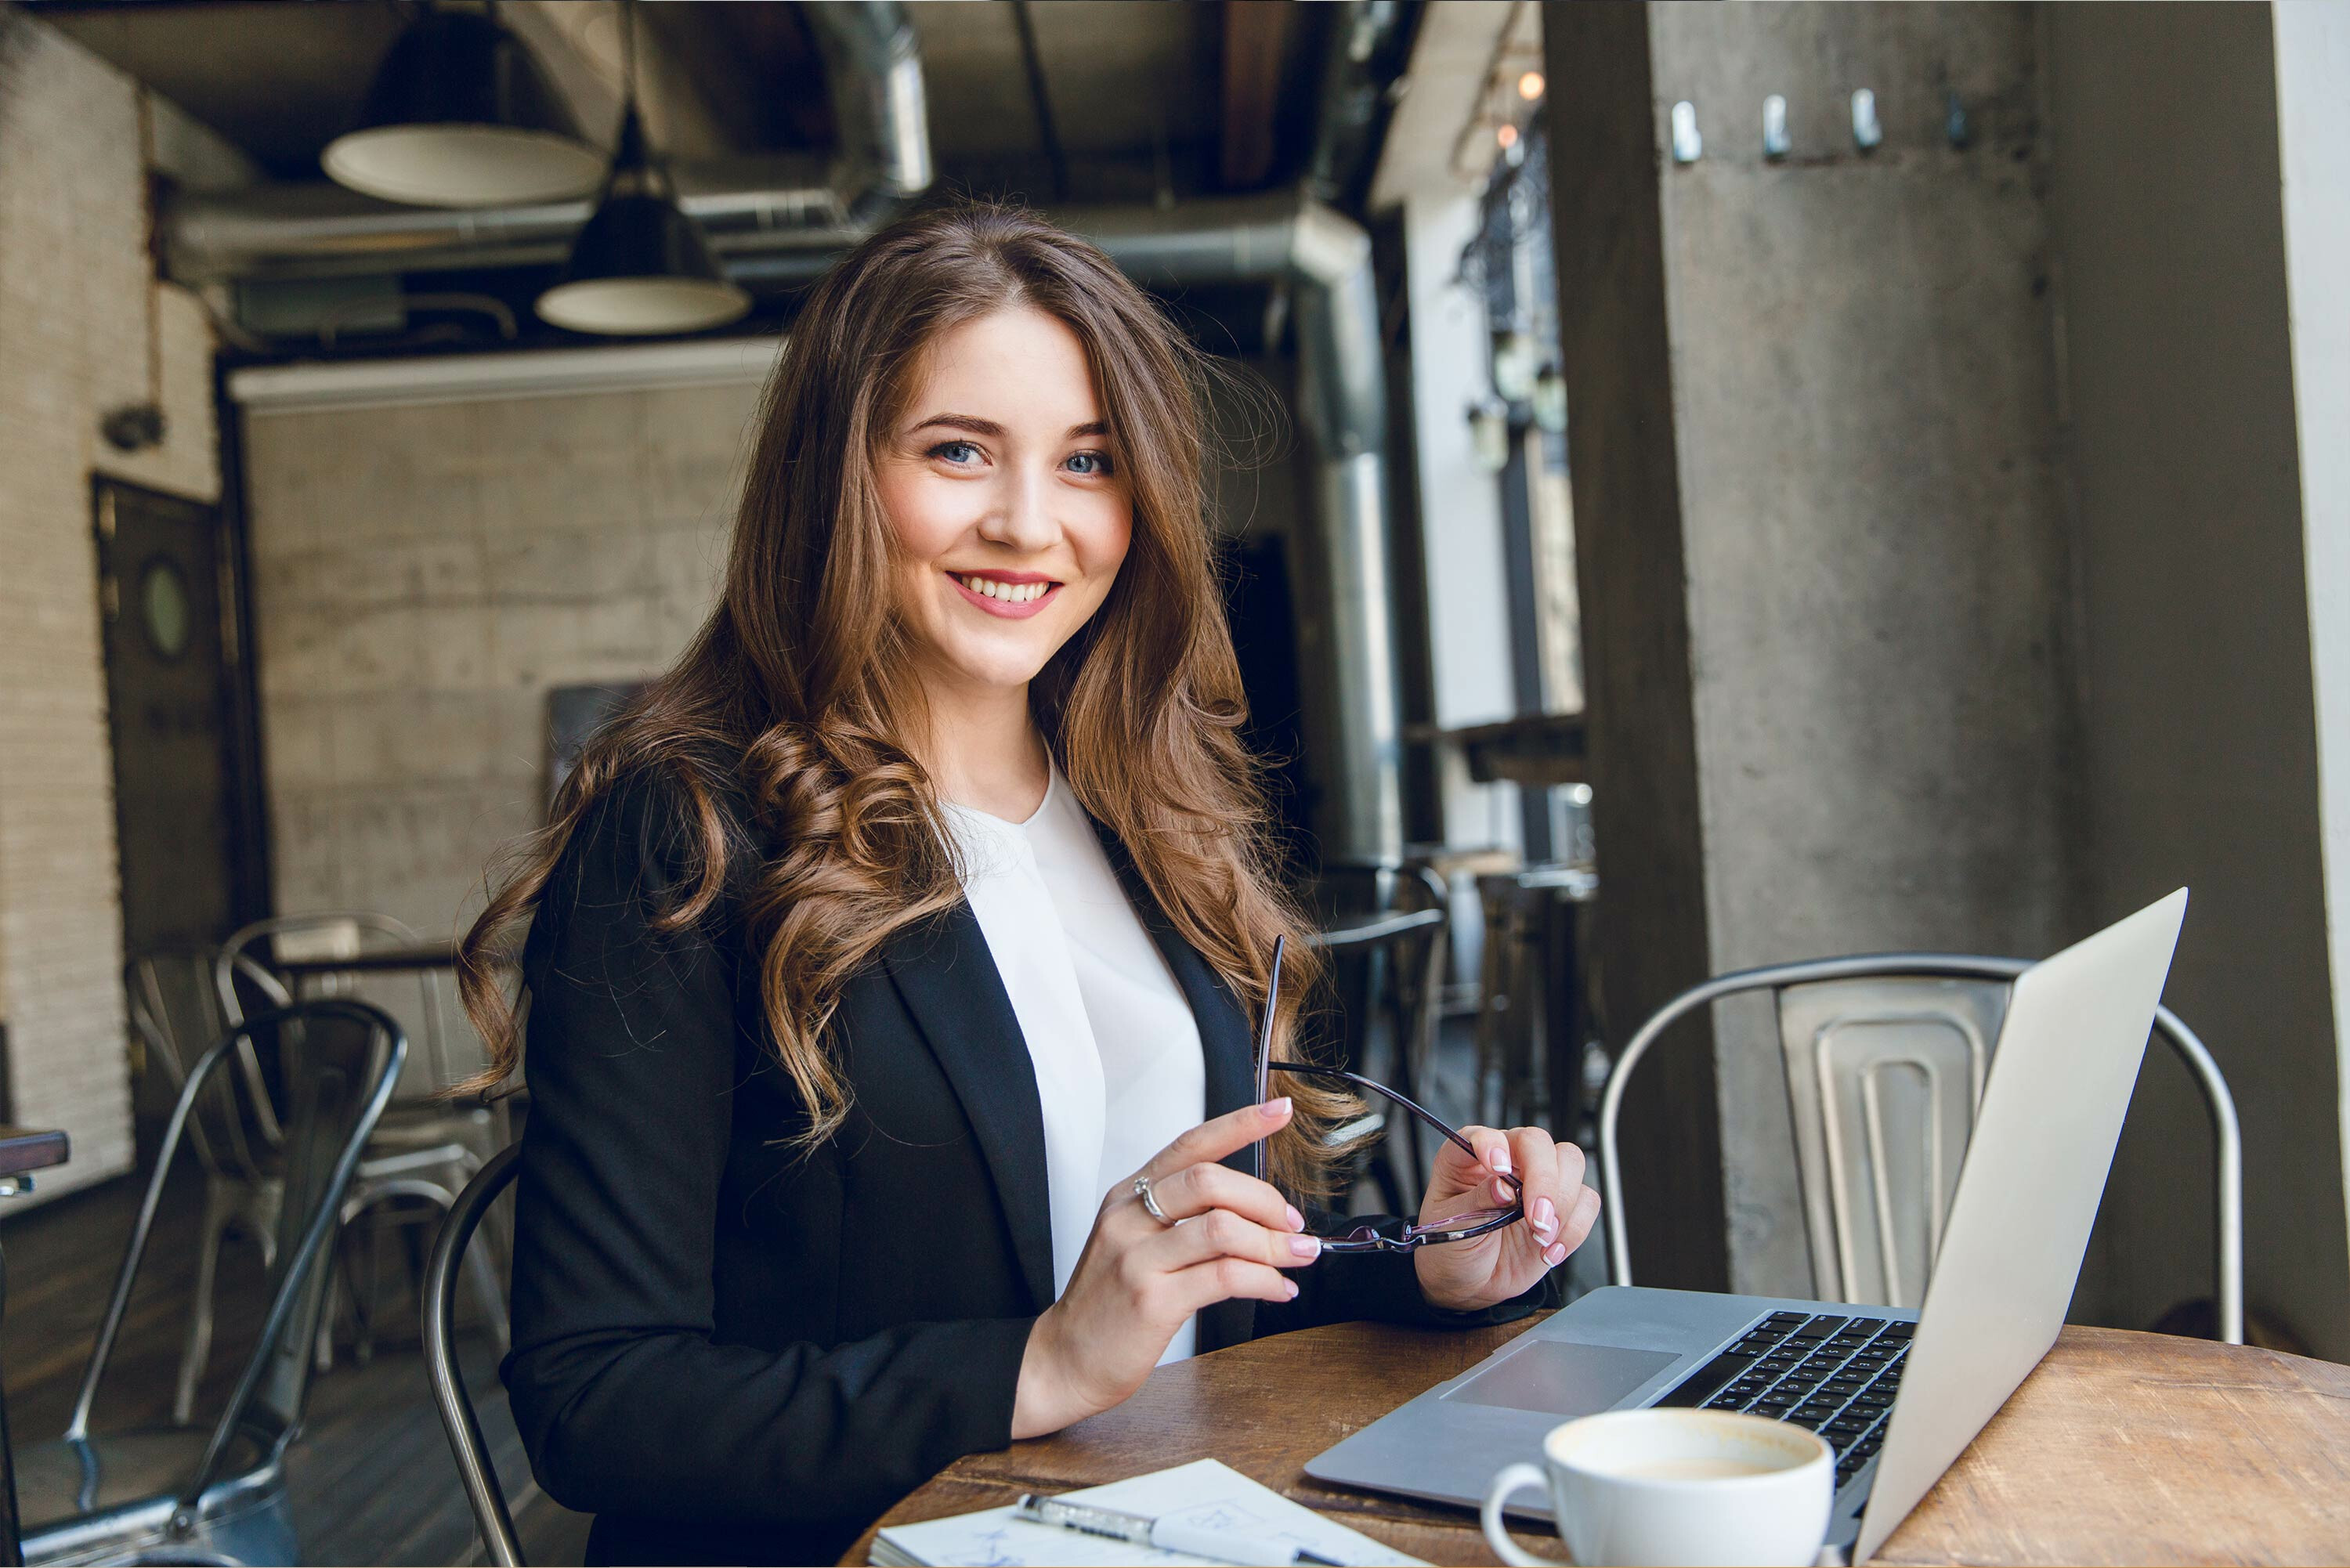 woman business owner smiling